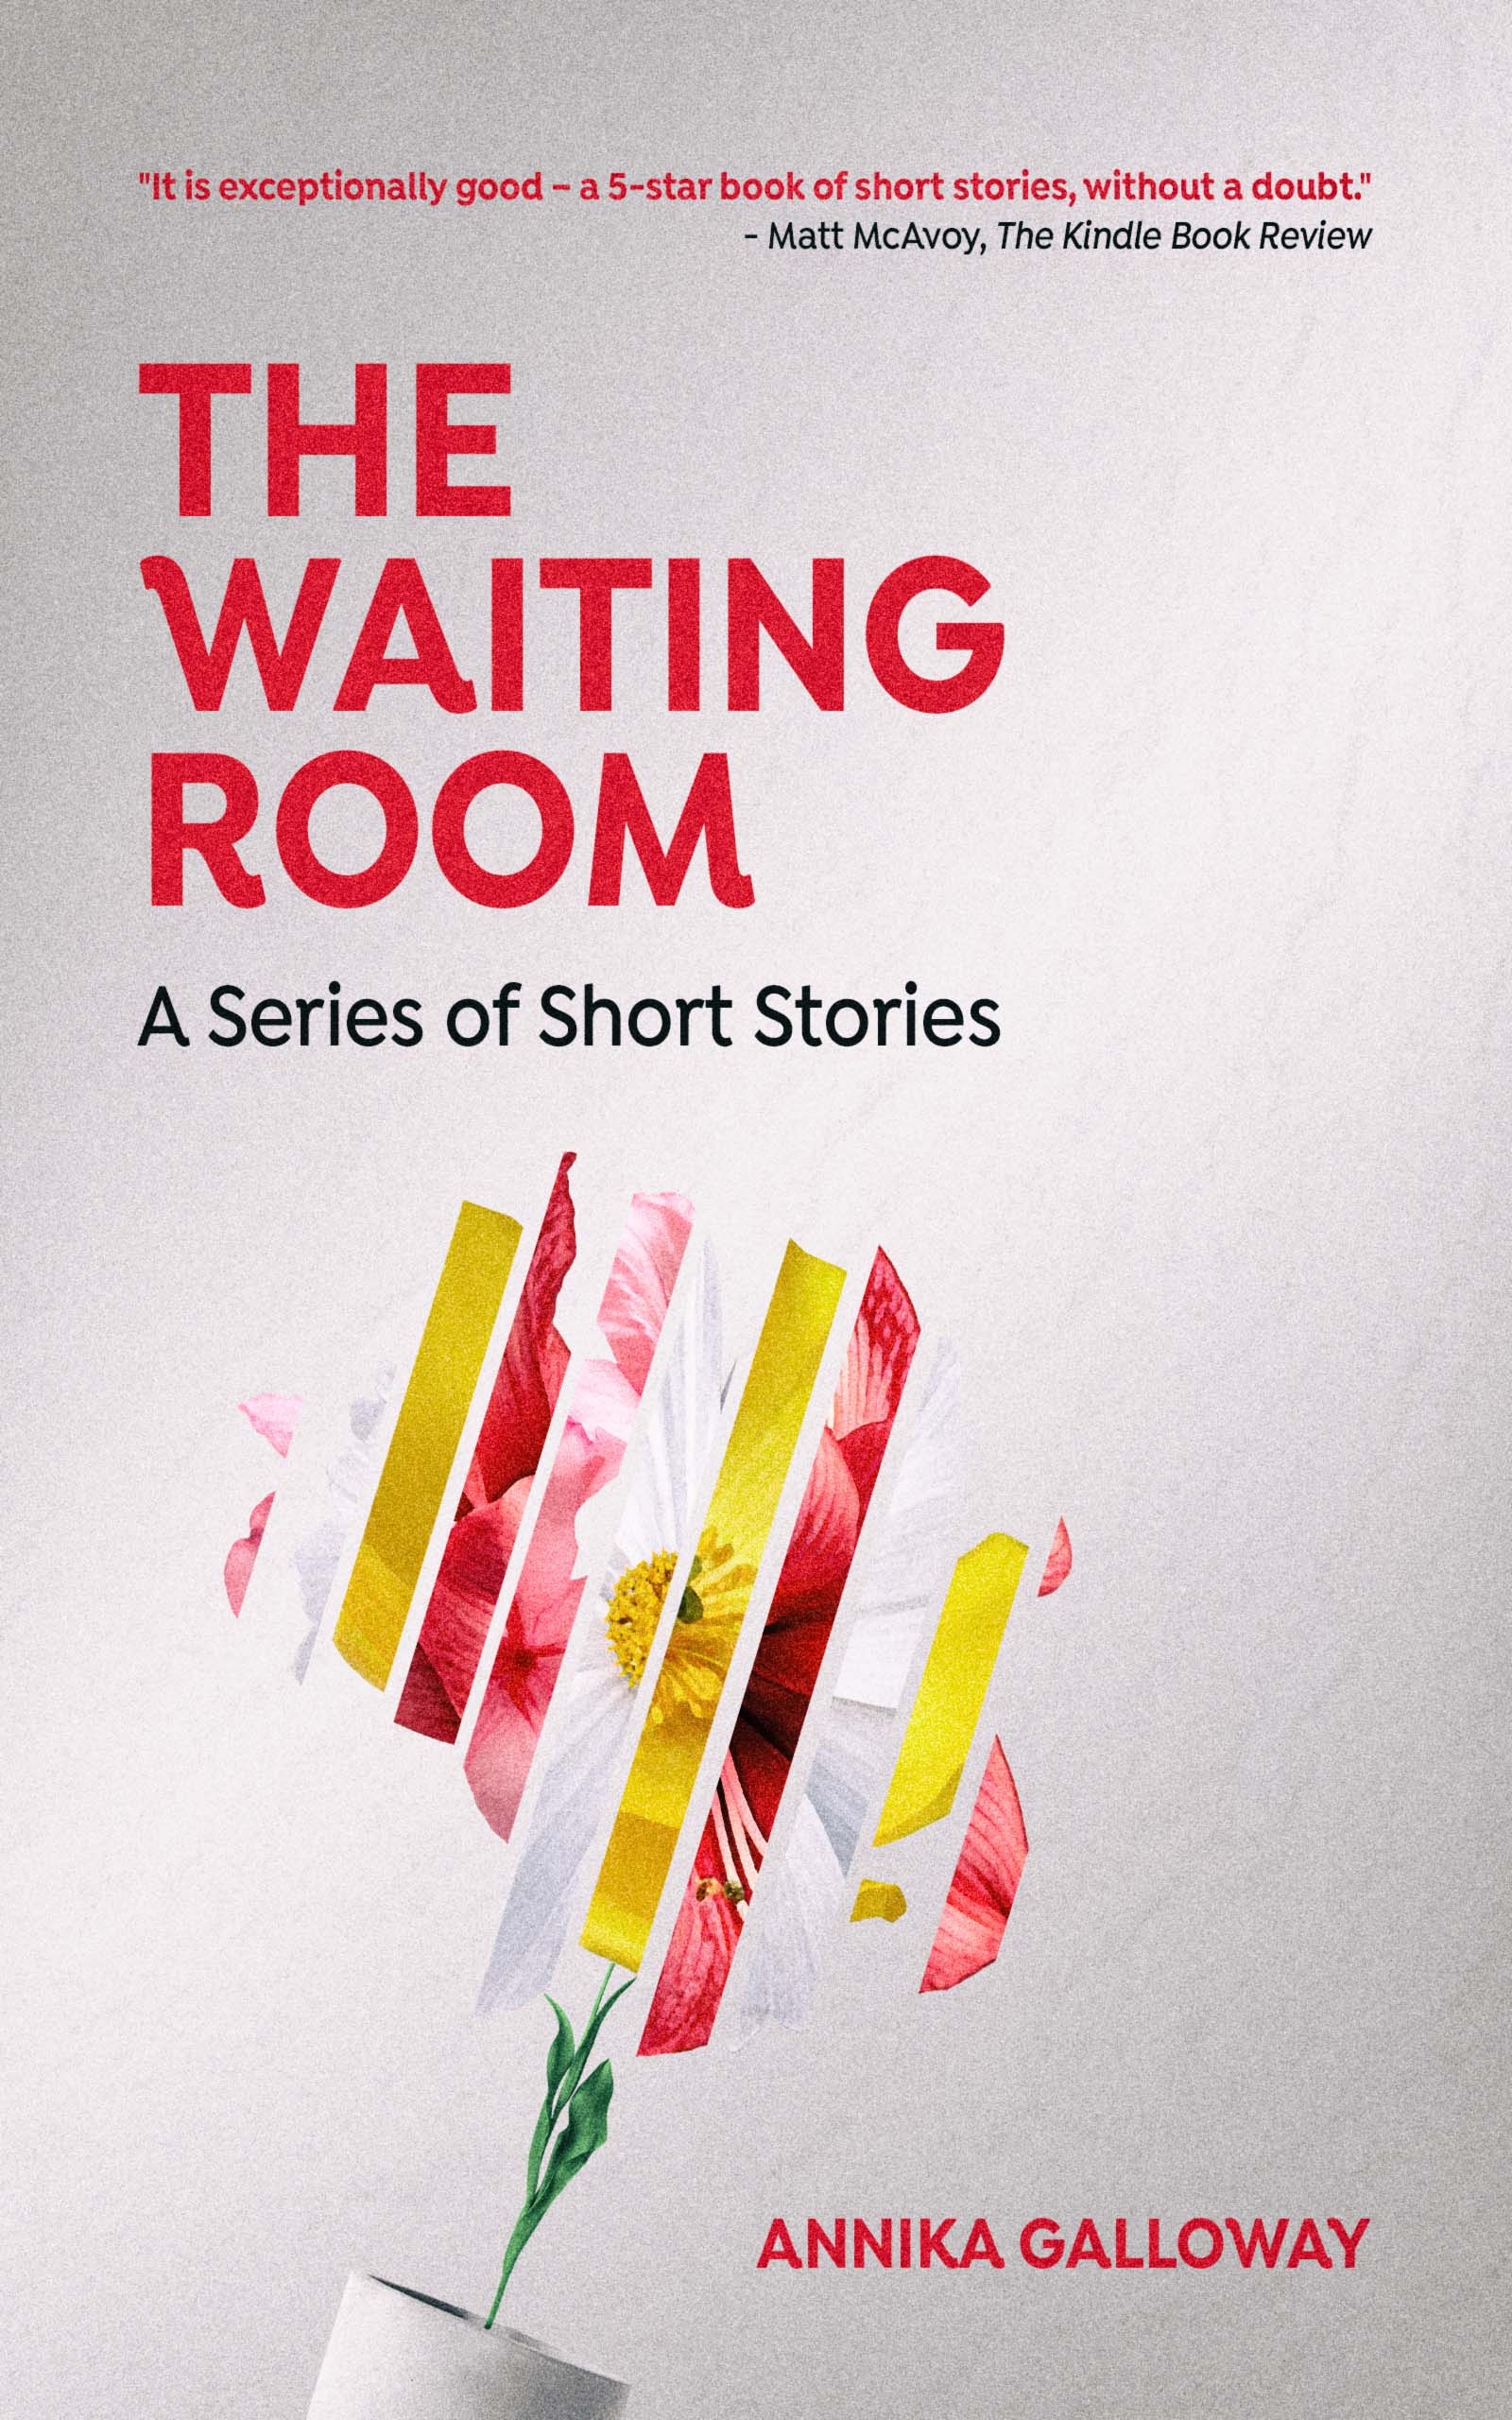 The Waiting Room by Annika Galloway